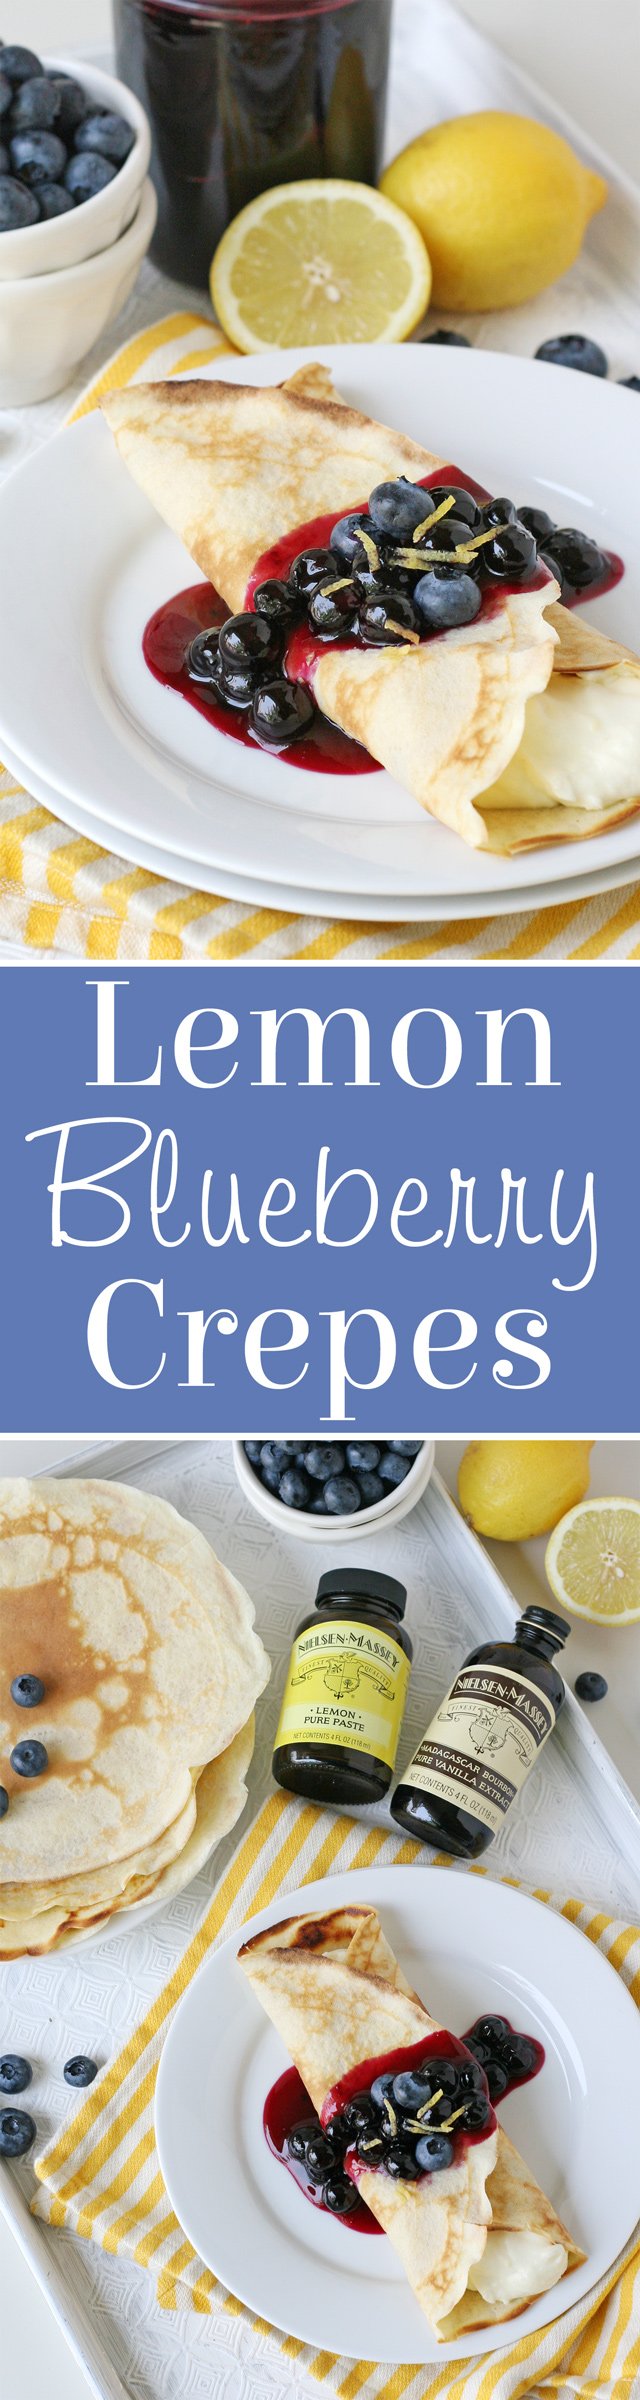 Lemon Blueberry Crepes Recipe - Homemade and delicious!